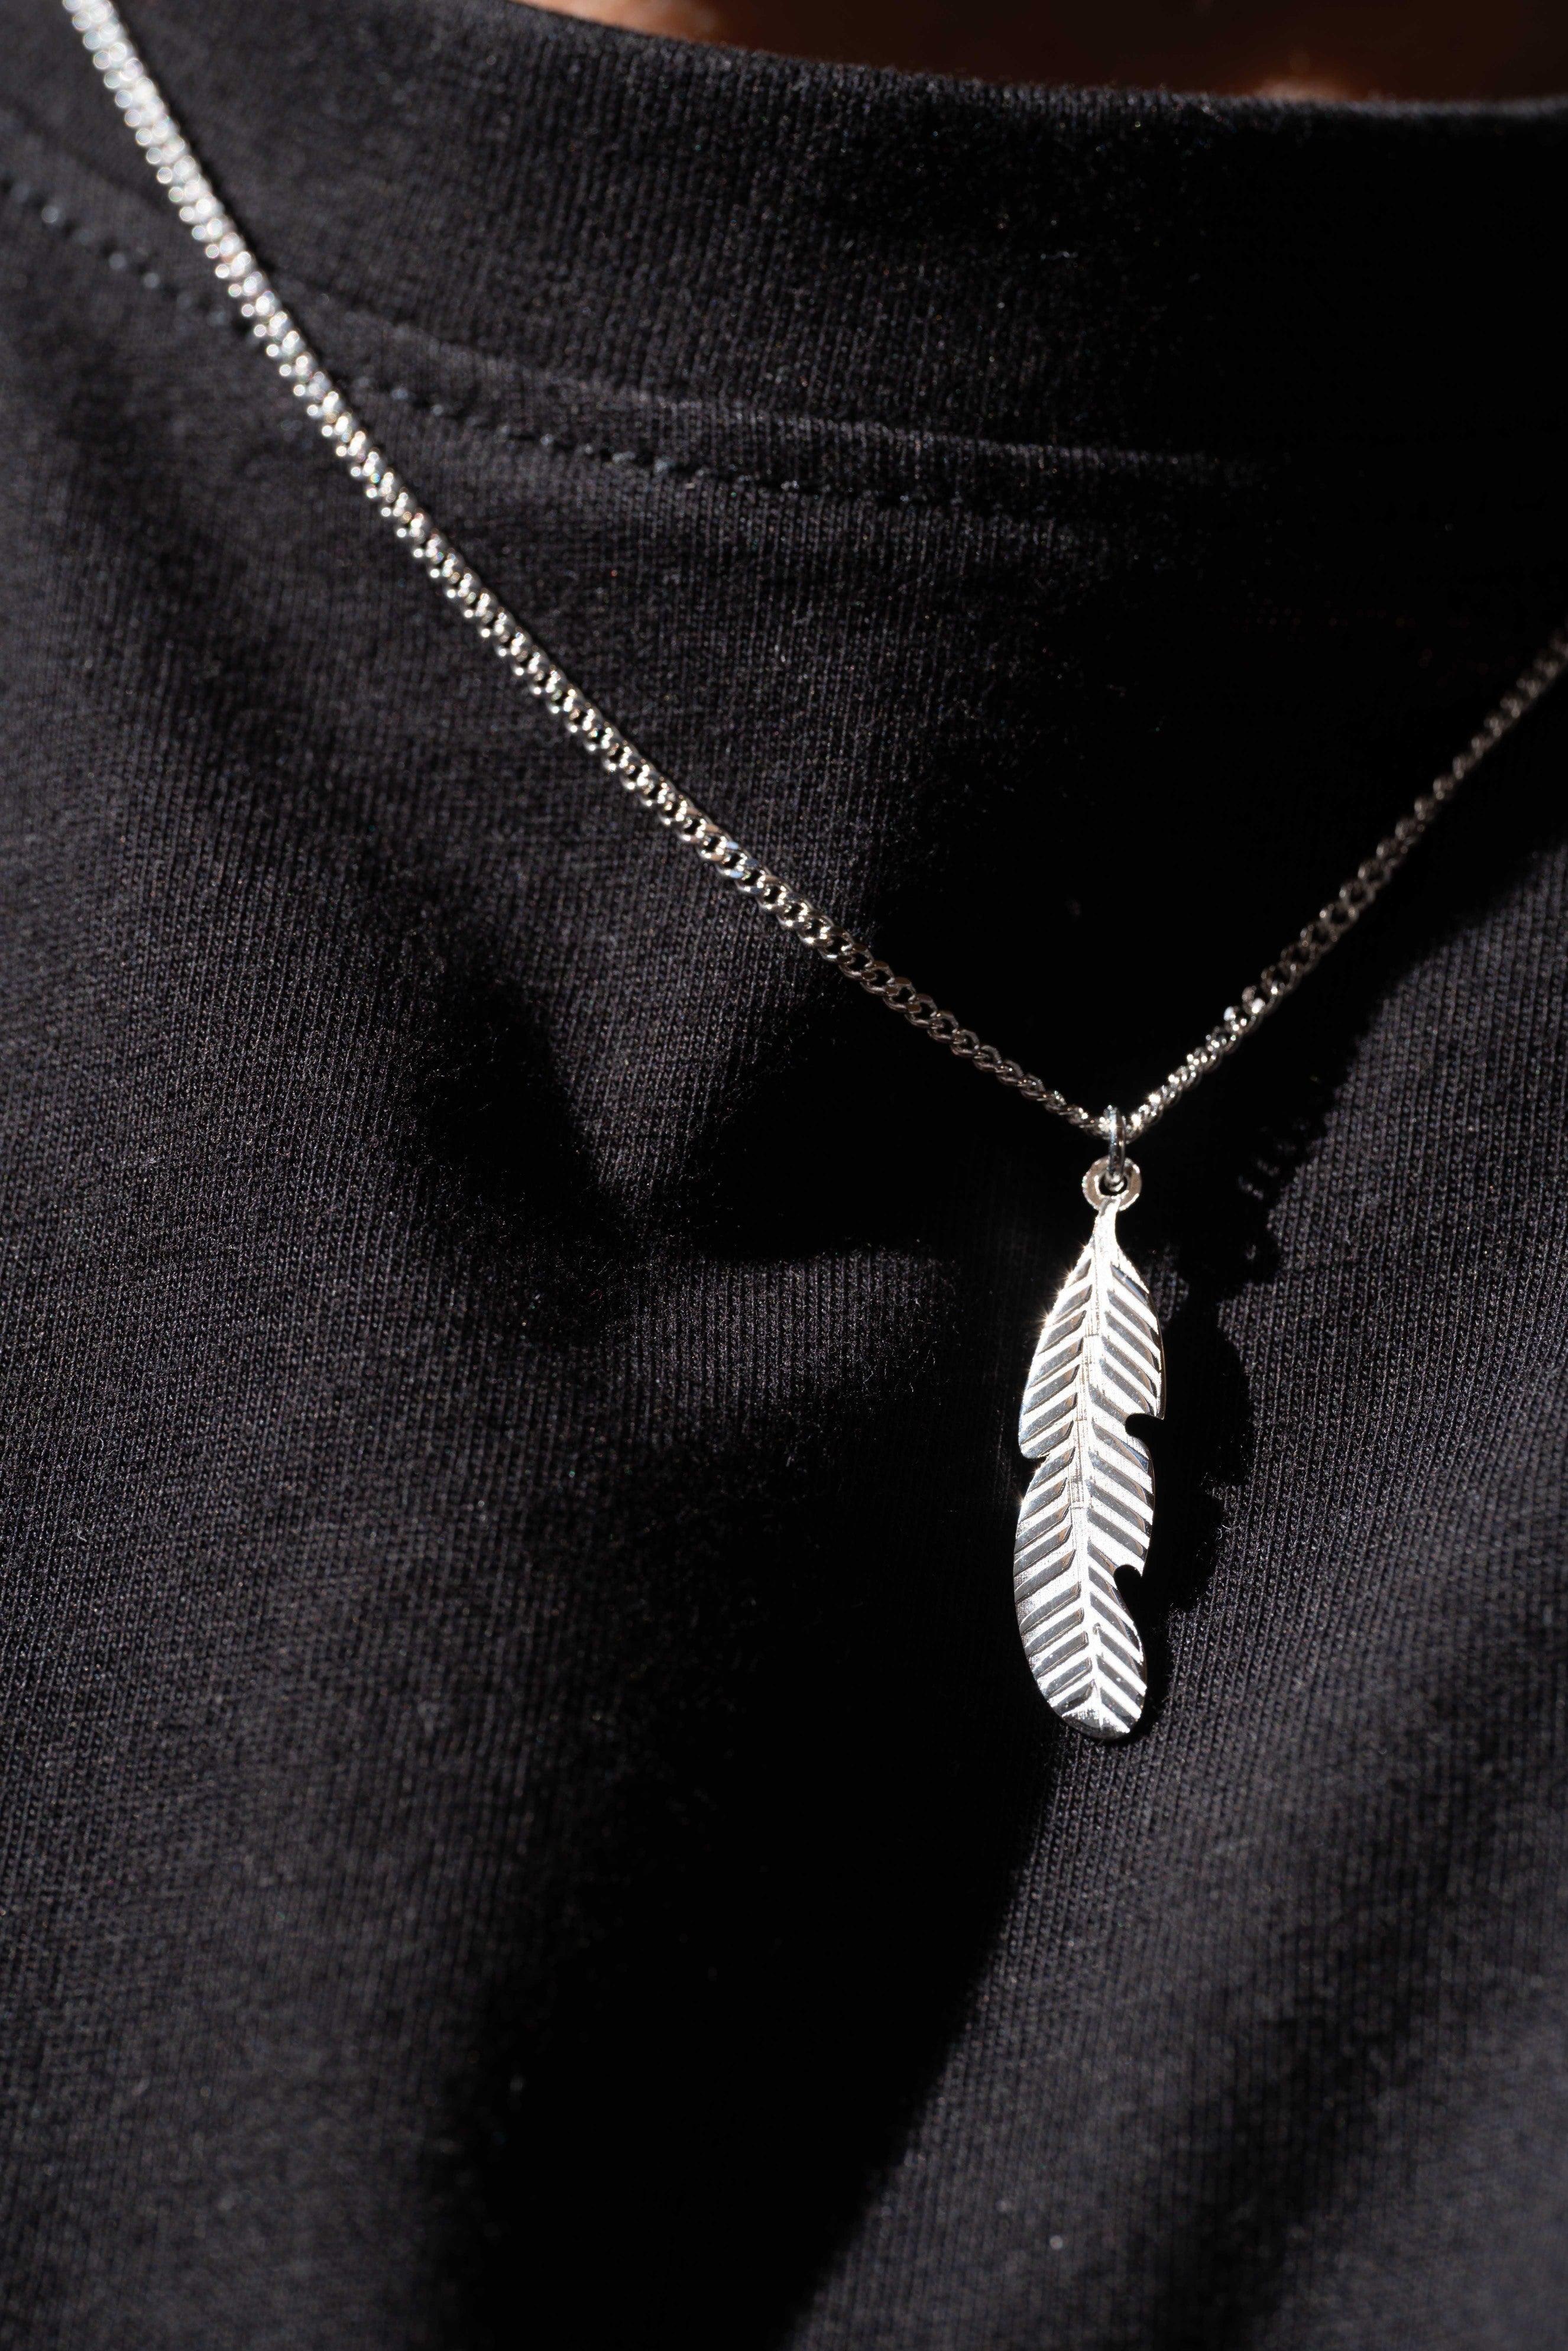 Feather Necklace - Yshmk